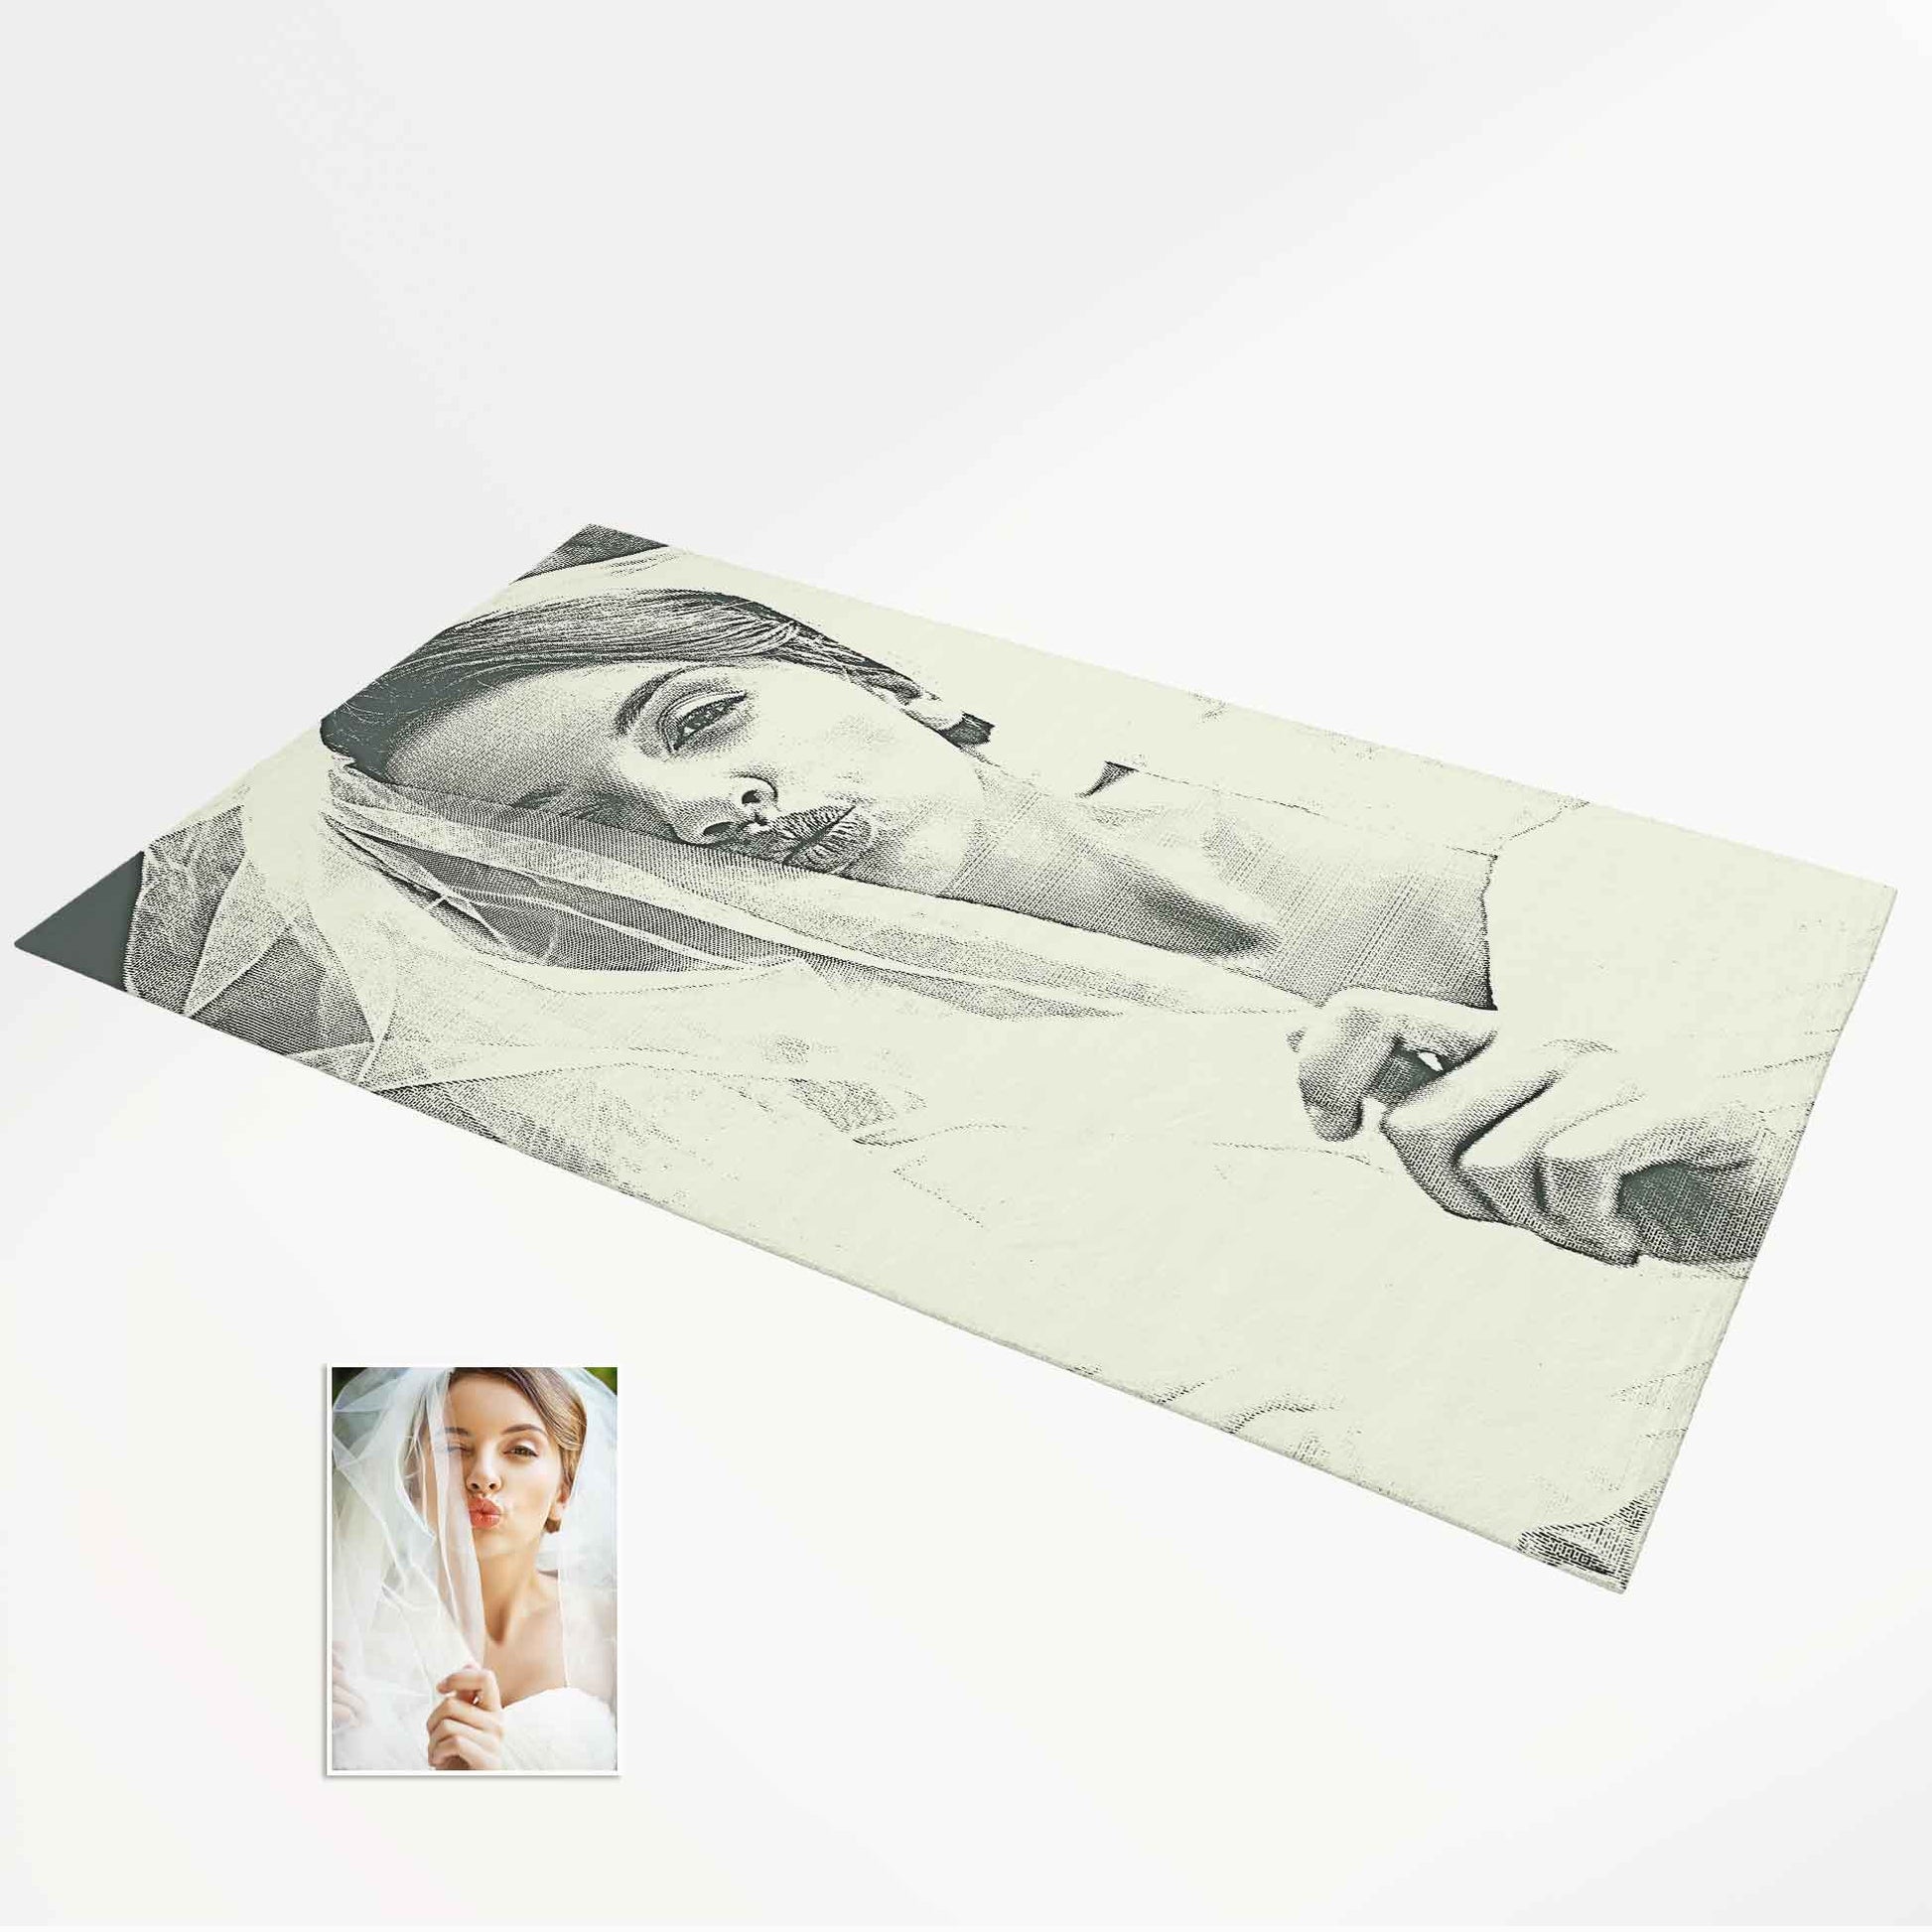 Experience personalised gifting at its finest with our Personalised Money Engraved Photo Rug. Turn memories into treasures of prosperity